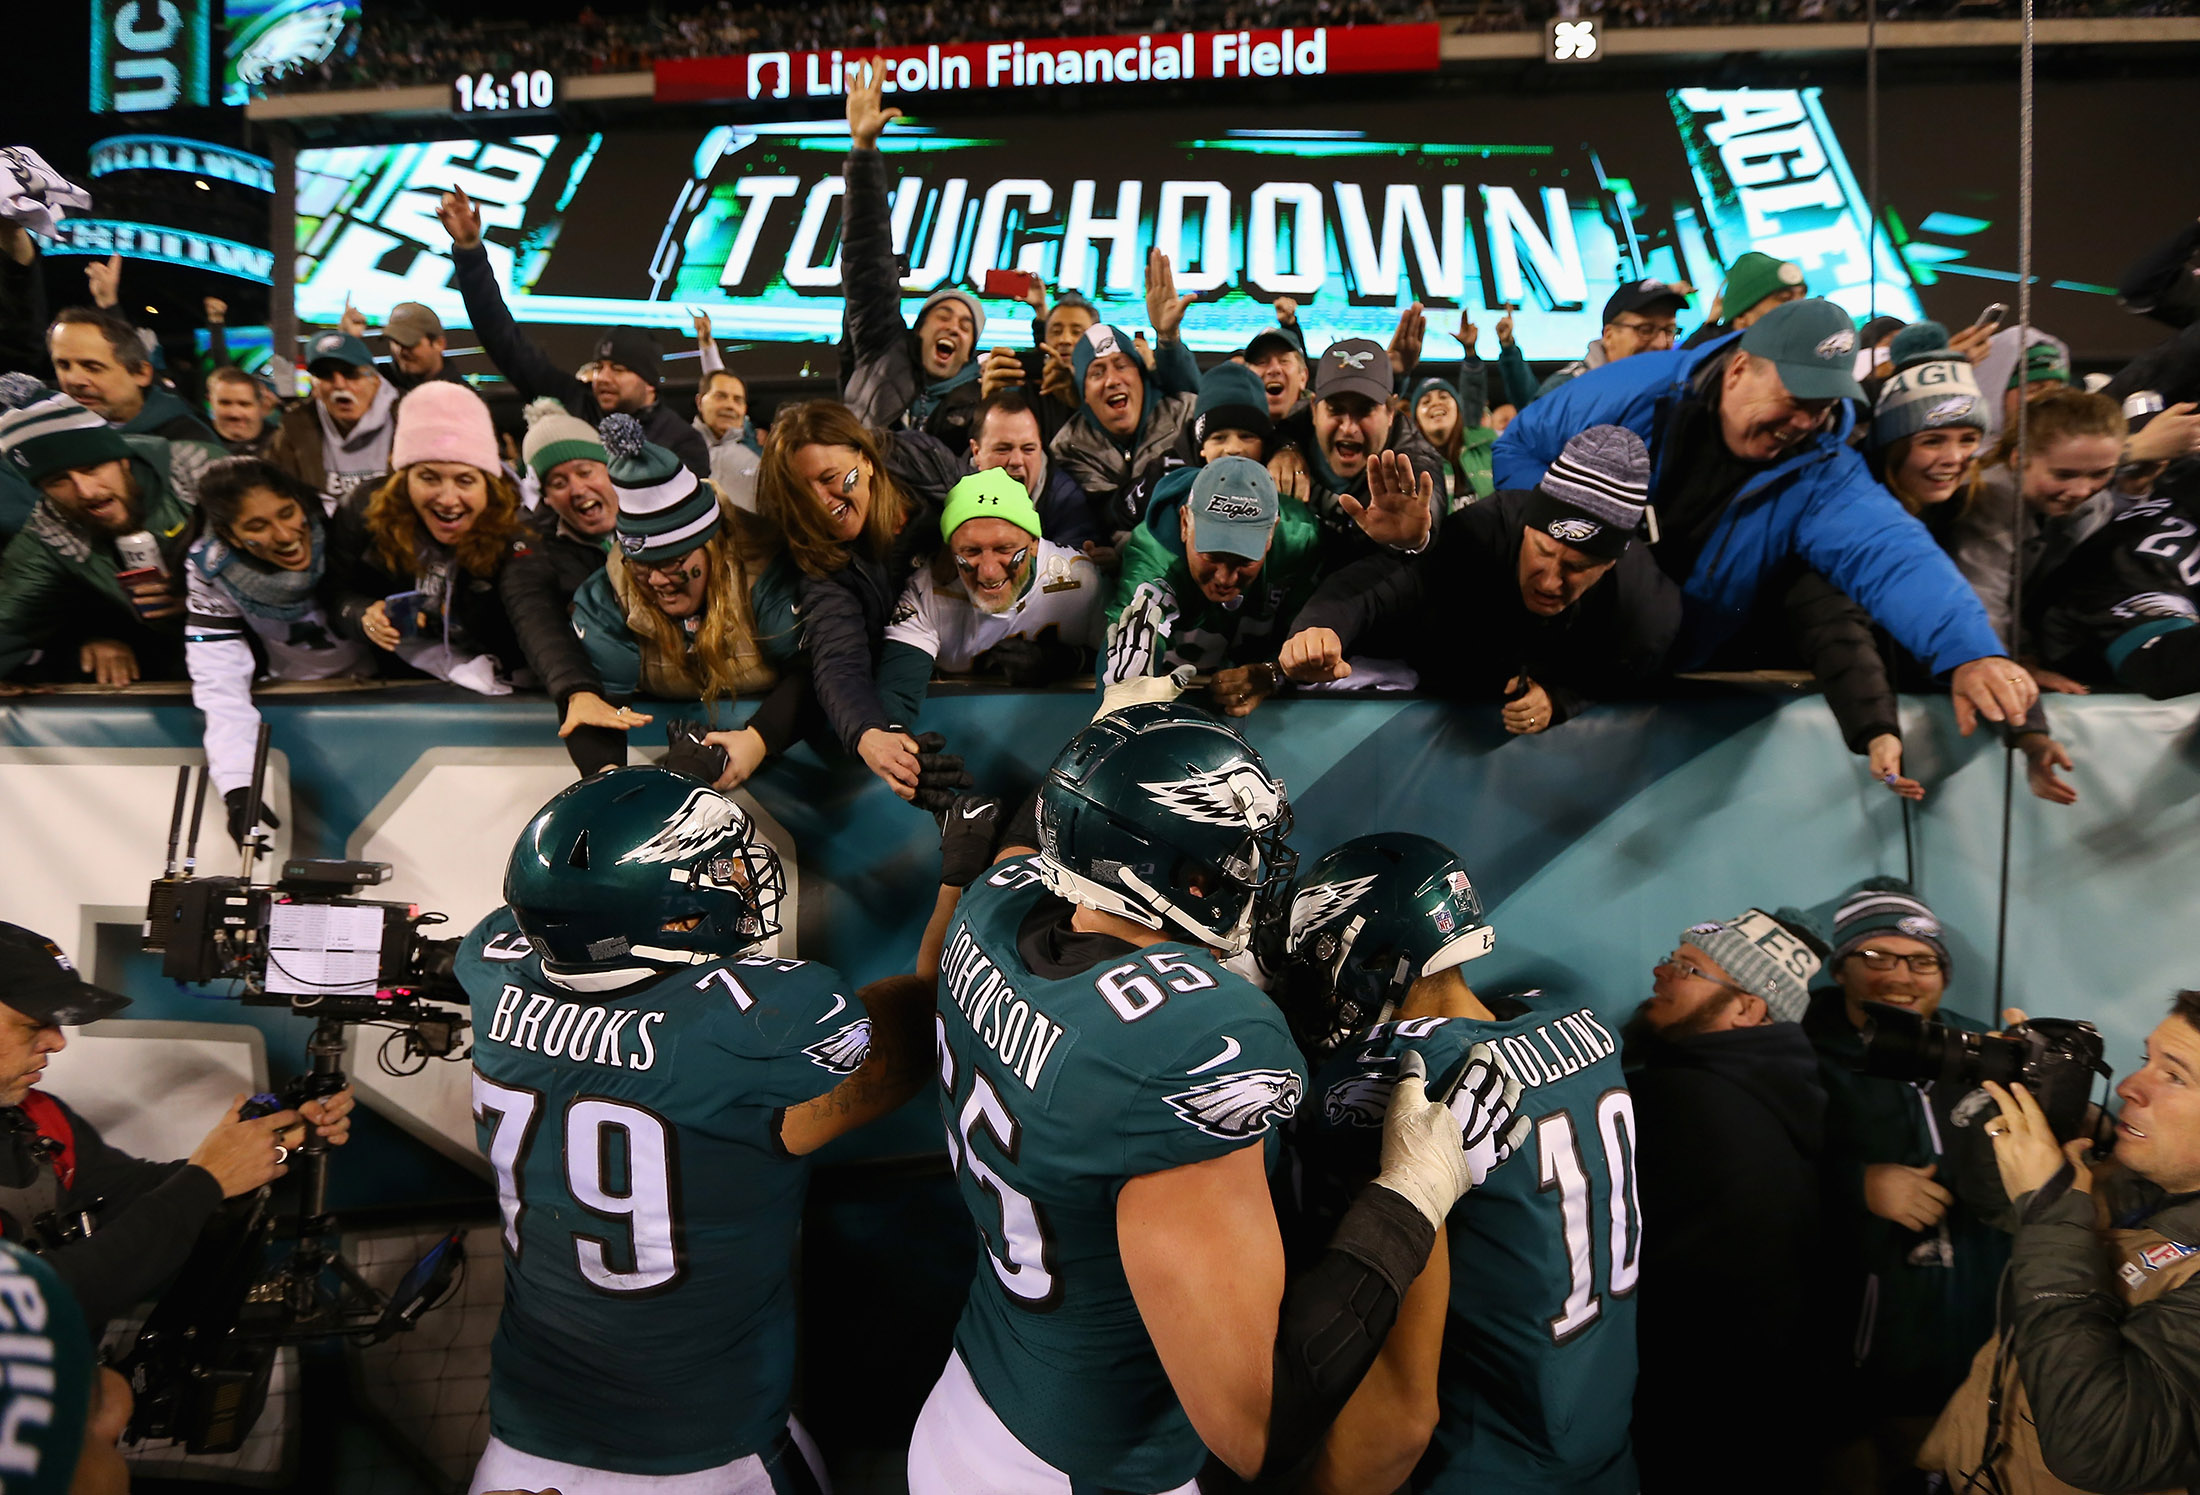 Ski Mask Season: The Eagles Want You to Replace Your Underdog Mask